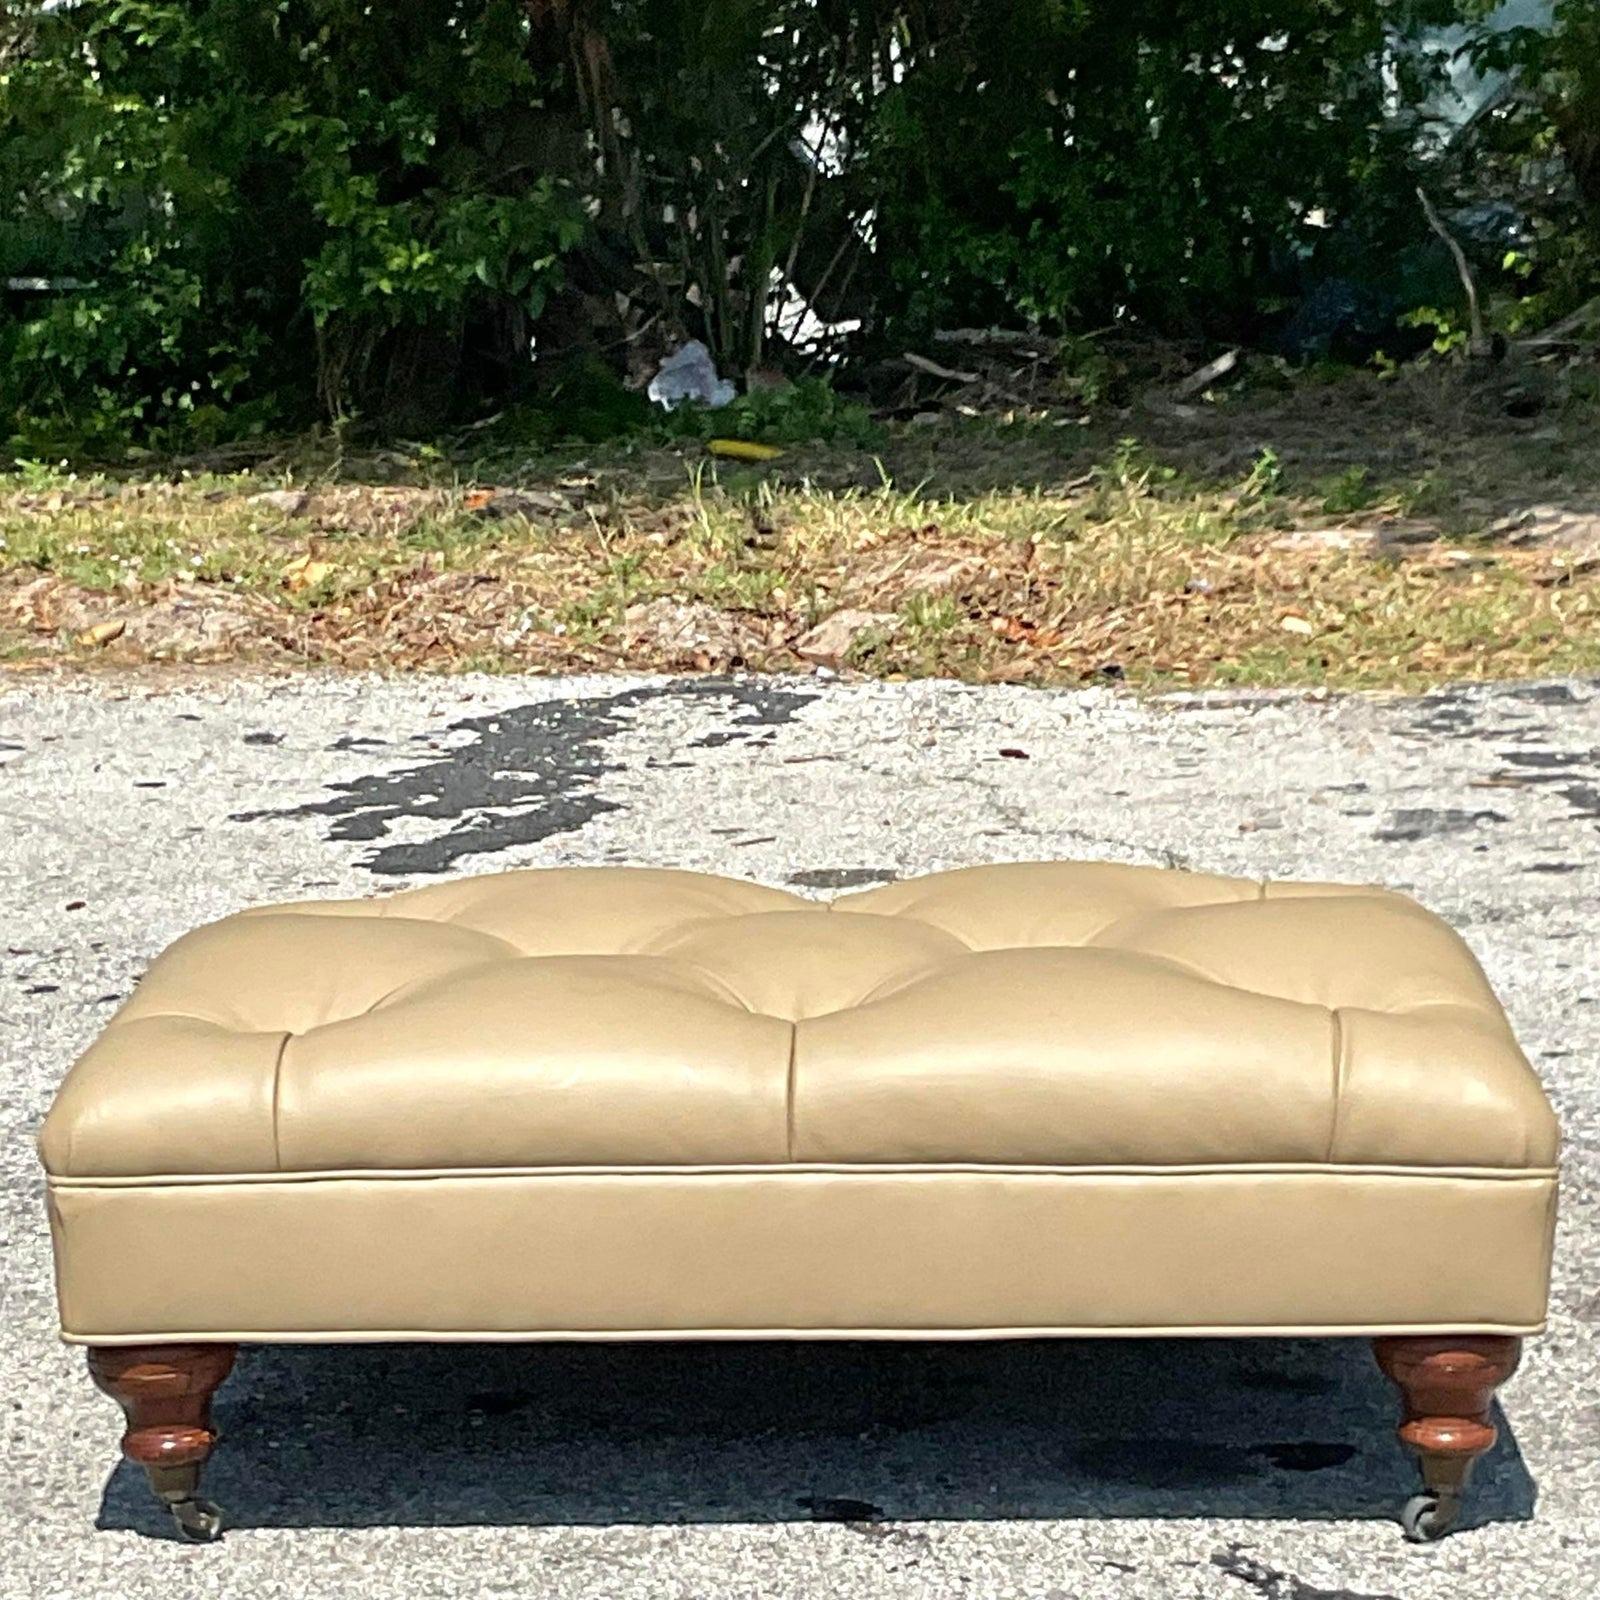 A fantastic vintage tufted leather ottoman, use it as a coffee table and put your feet on it. Acquired at a Palm Beach estate.